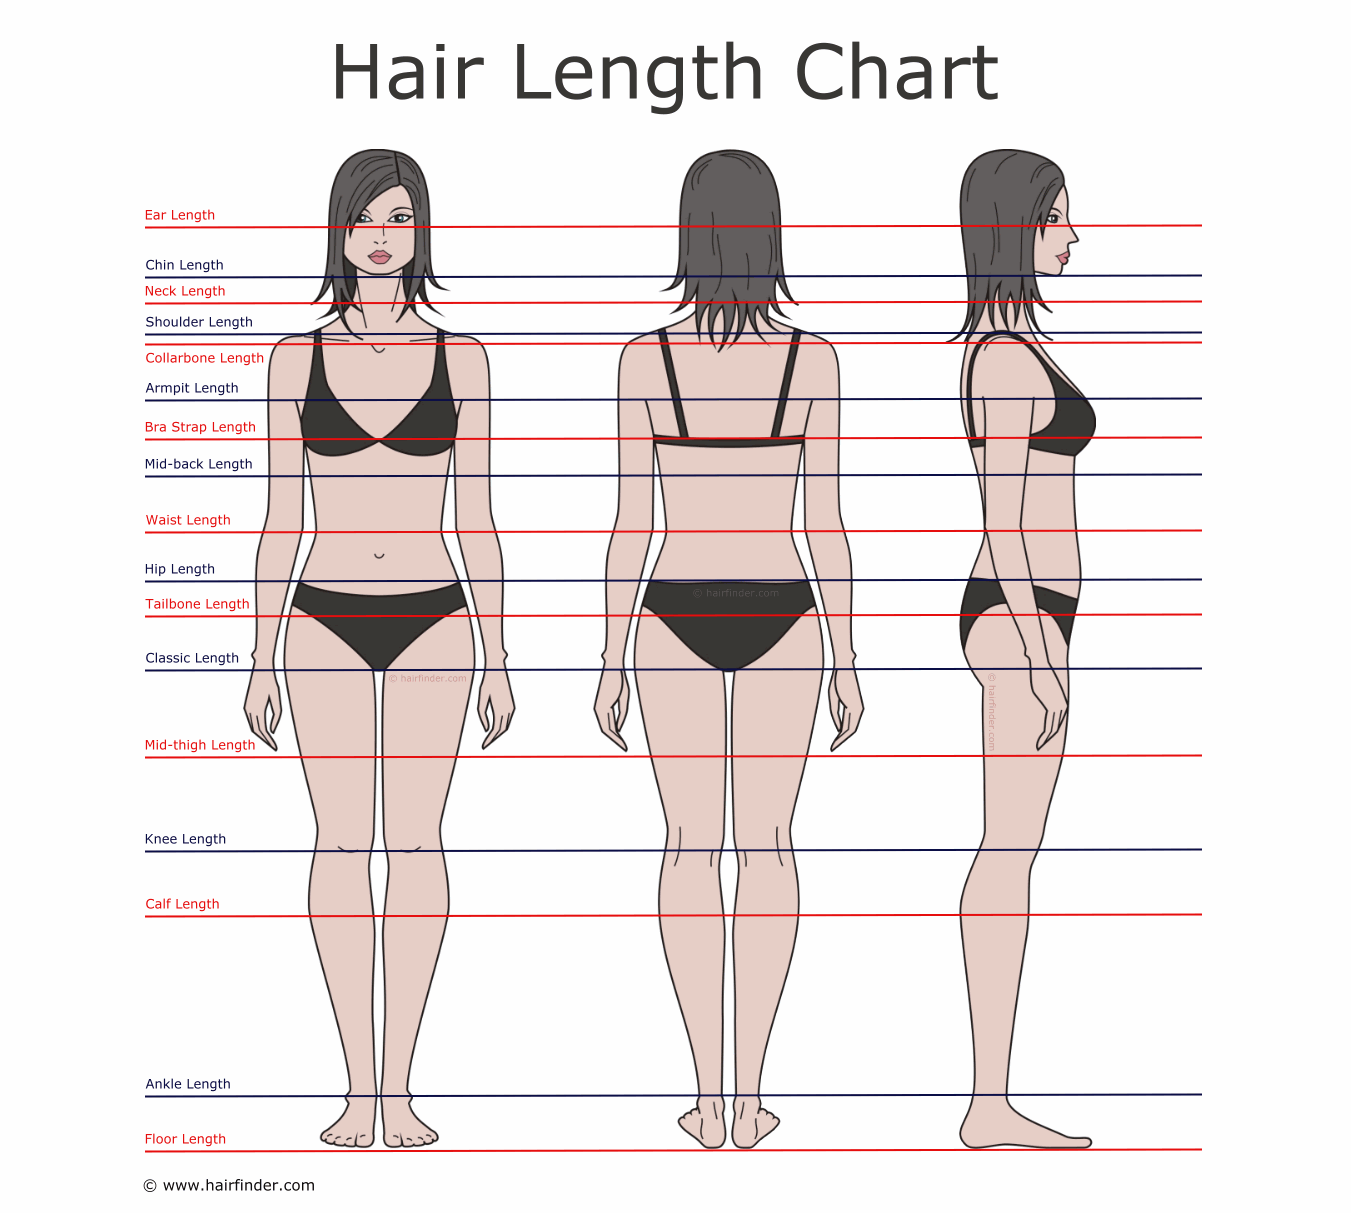 How to describe hair lengths  Hair length chart and the difinitions for  the most common lengths